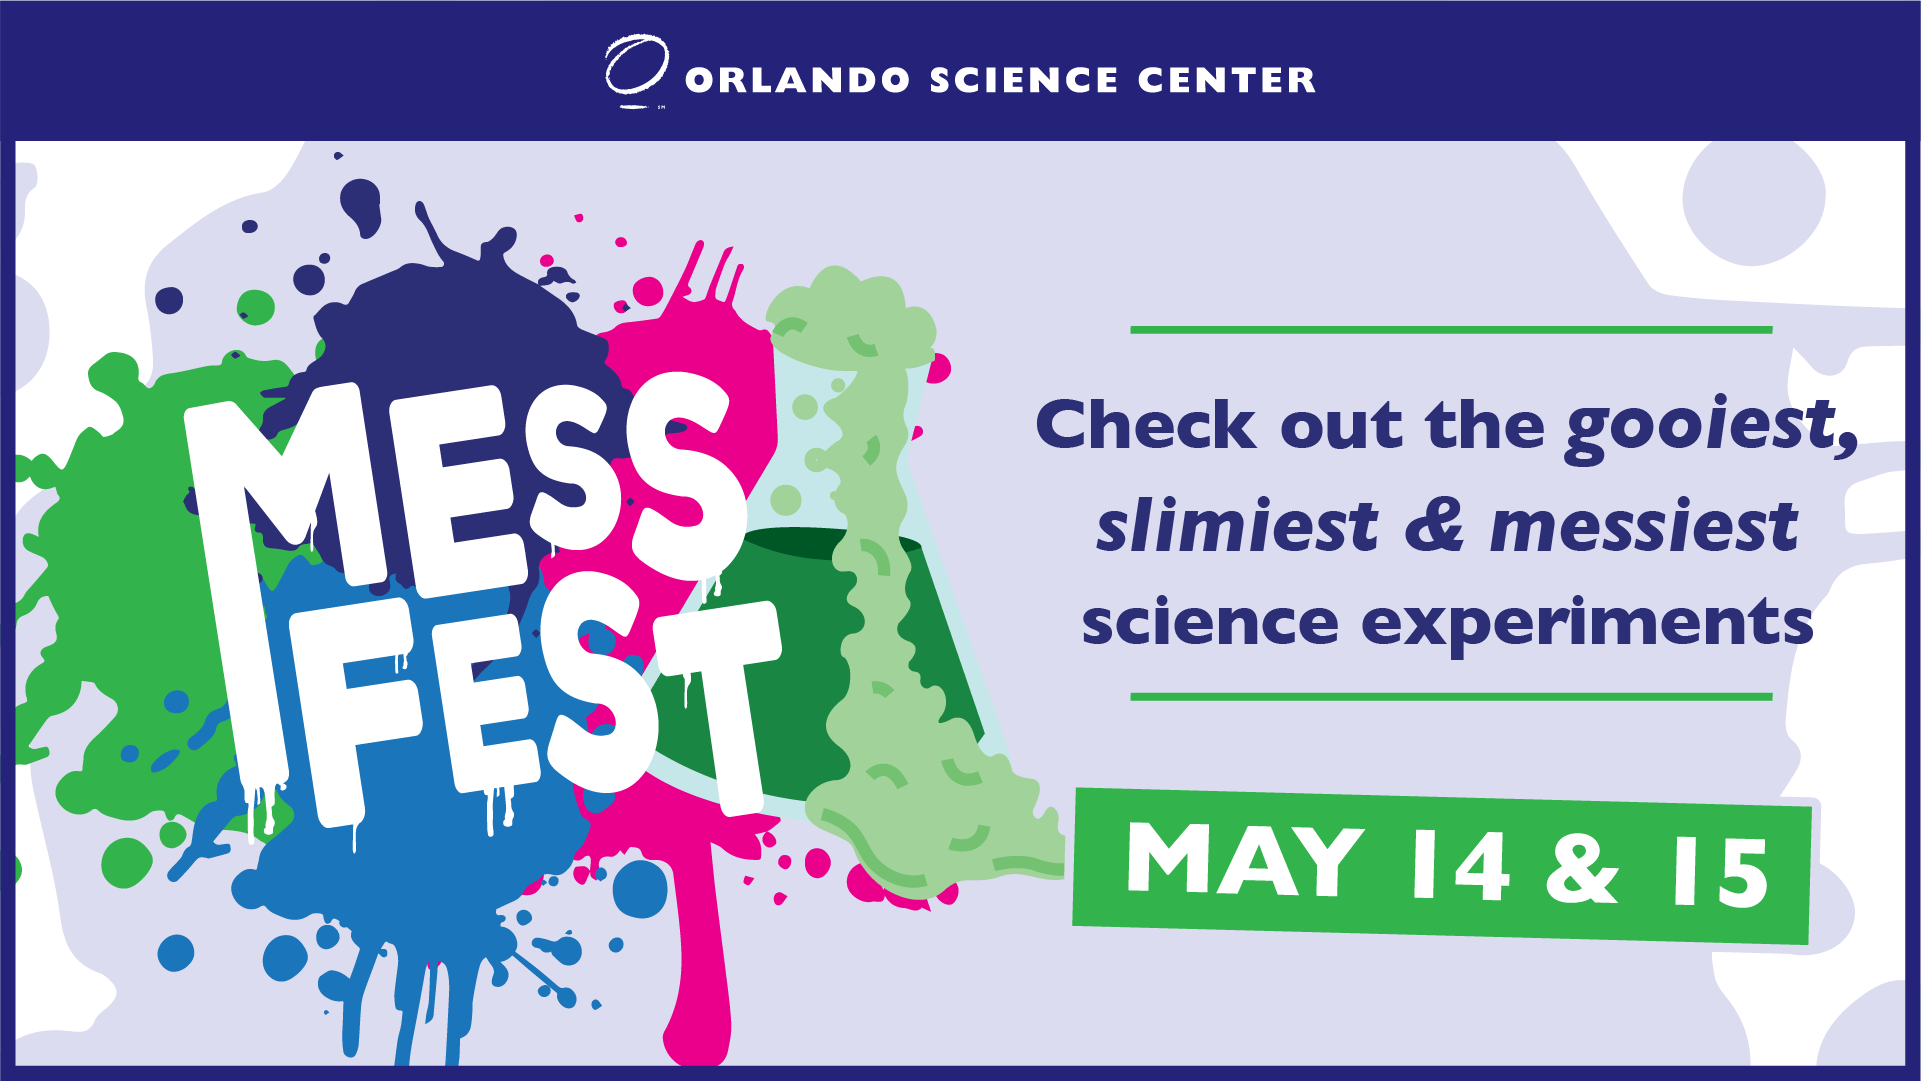 A graphic covered in pain splatter reading Mess Fest - Check out the gooiest, slimiest & messiest science experiments May 14 & 15